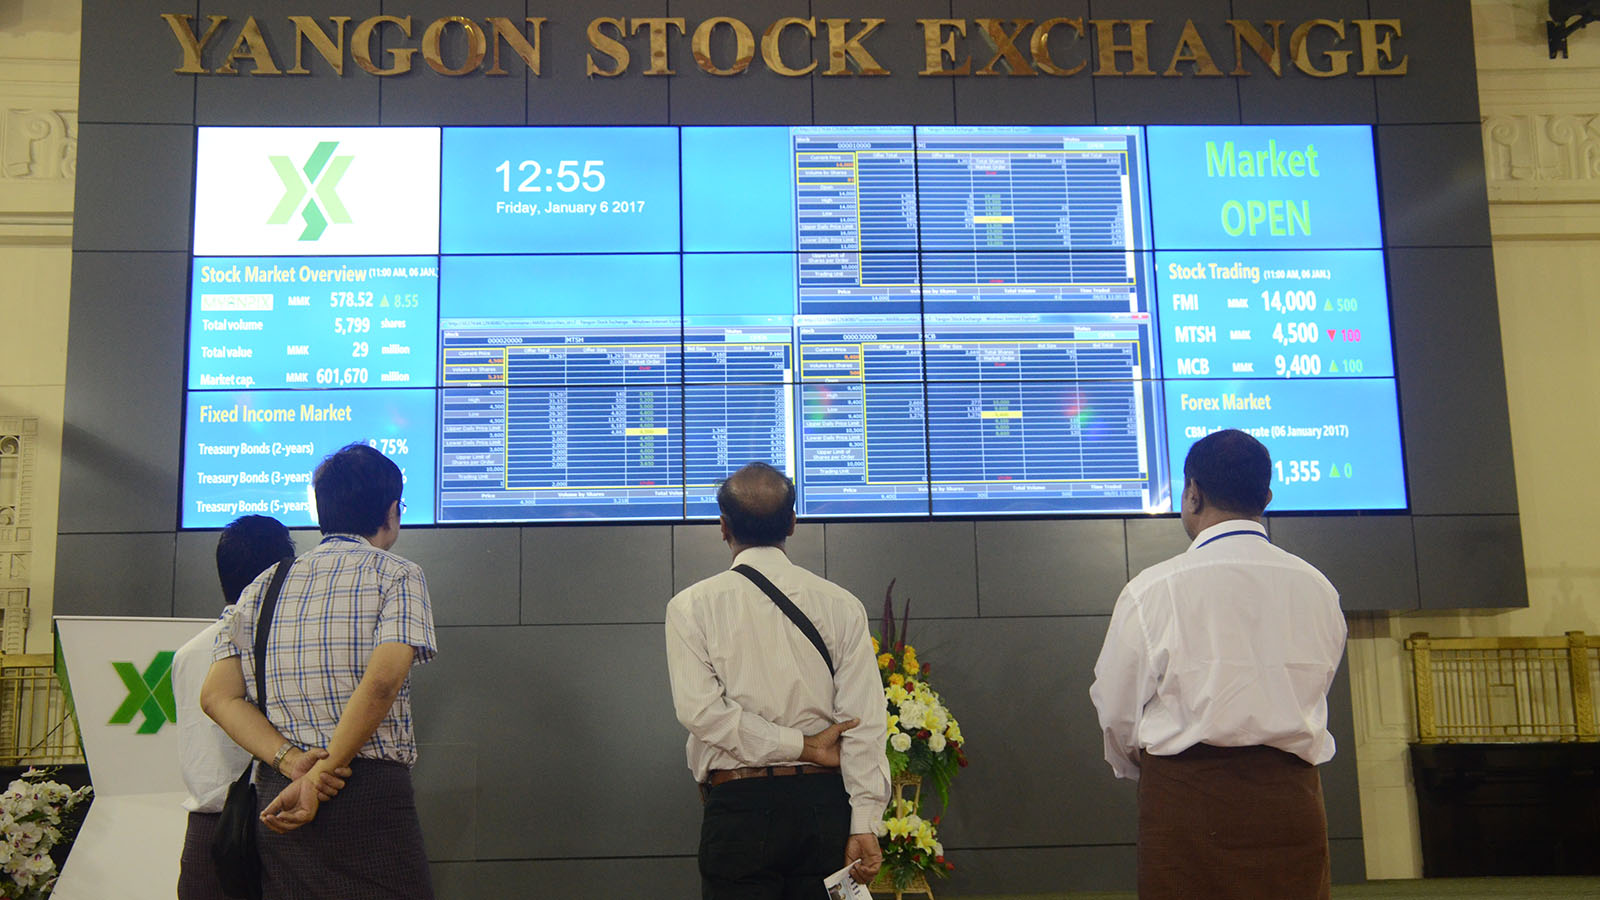 The value of share prices at Yangon Stock Exchange (YSX) fall despite an increase in trading volume 